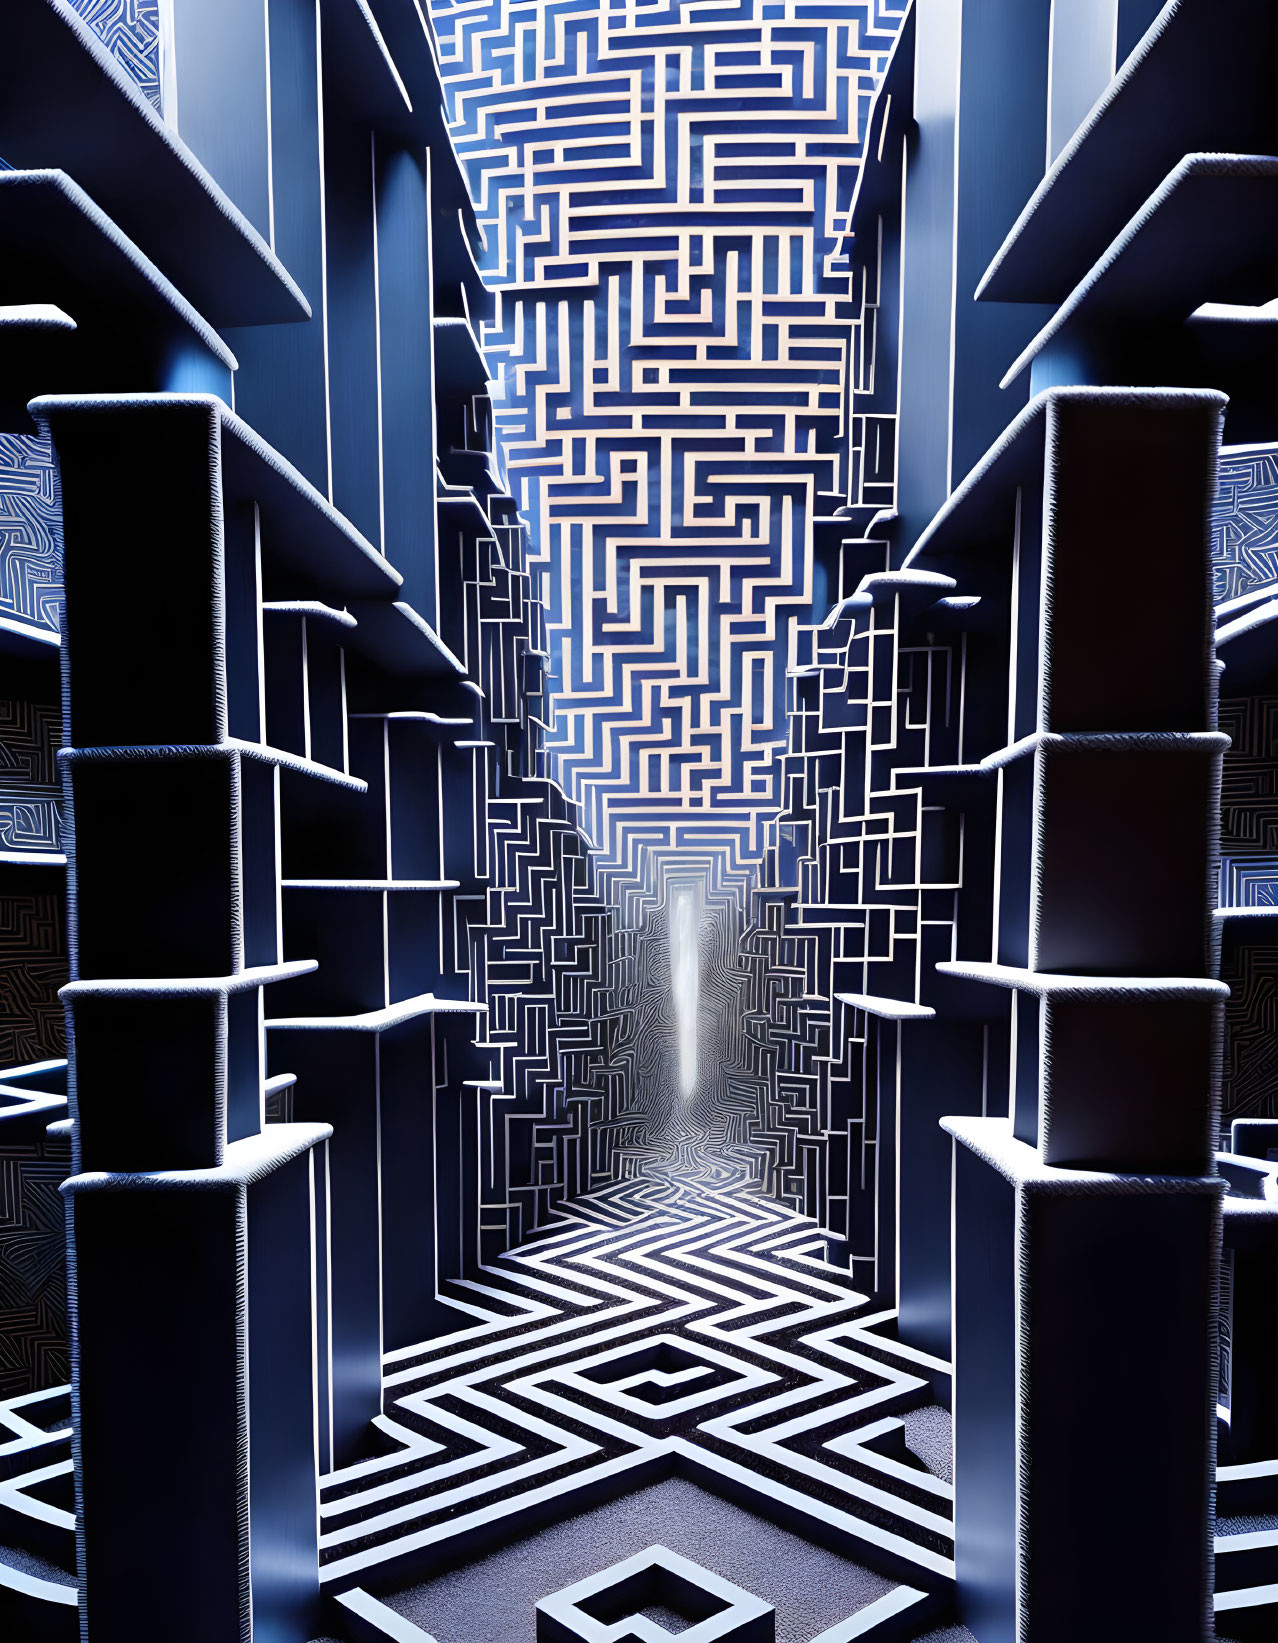 Maze-Patterned Hallway with Blue Neon Lights and White Doorway